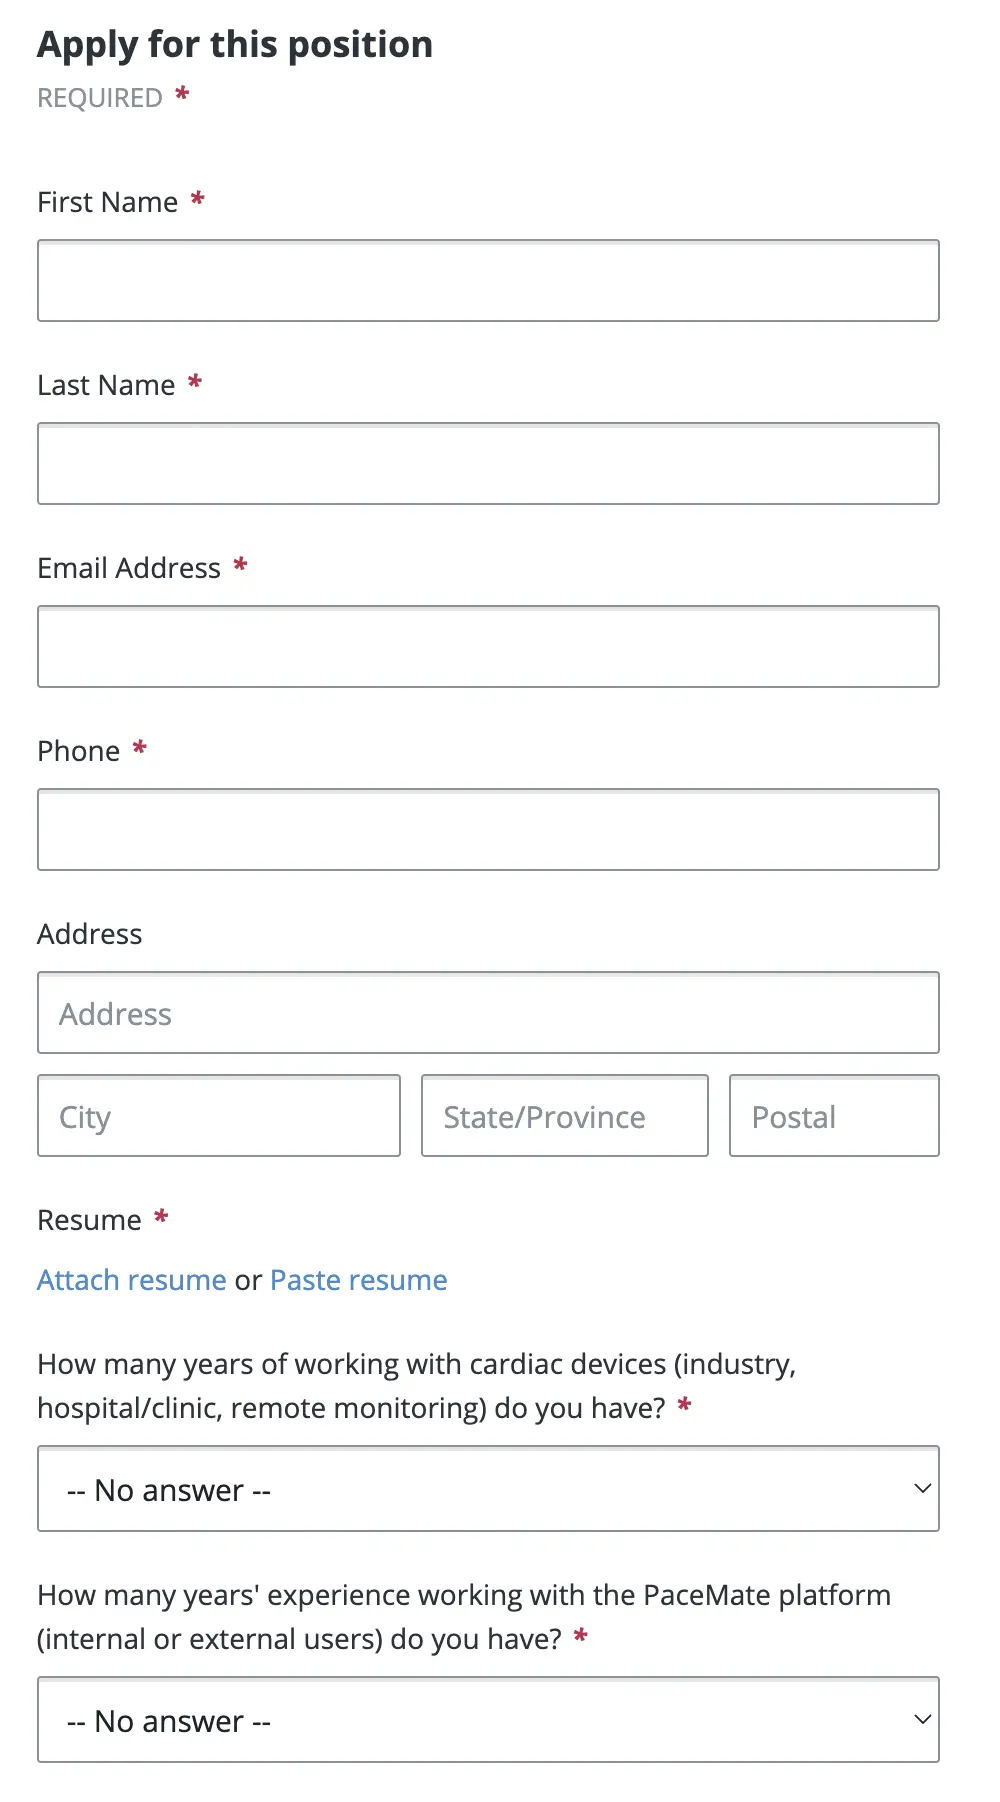 Screenshot of how the application form will look